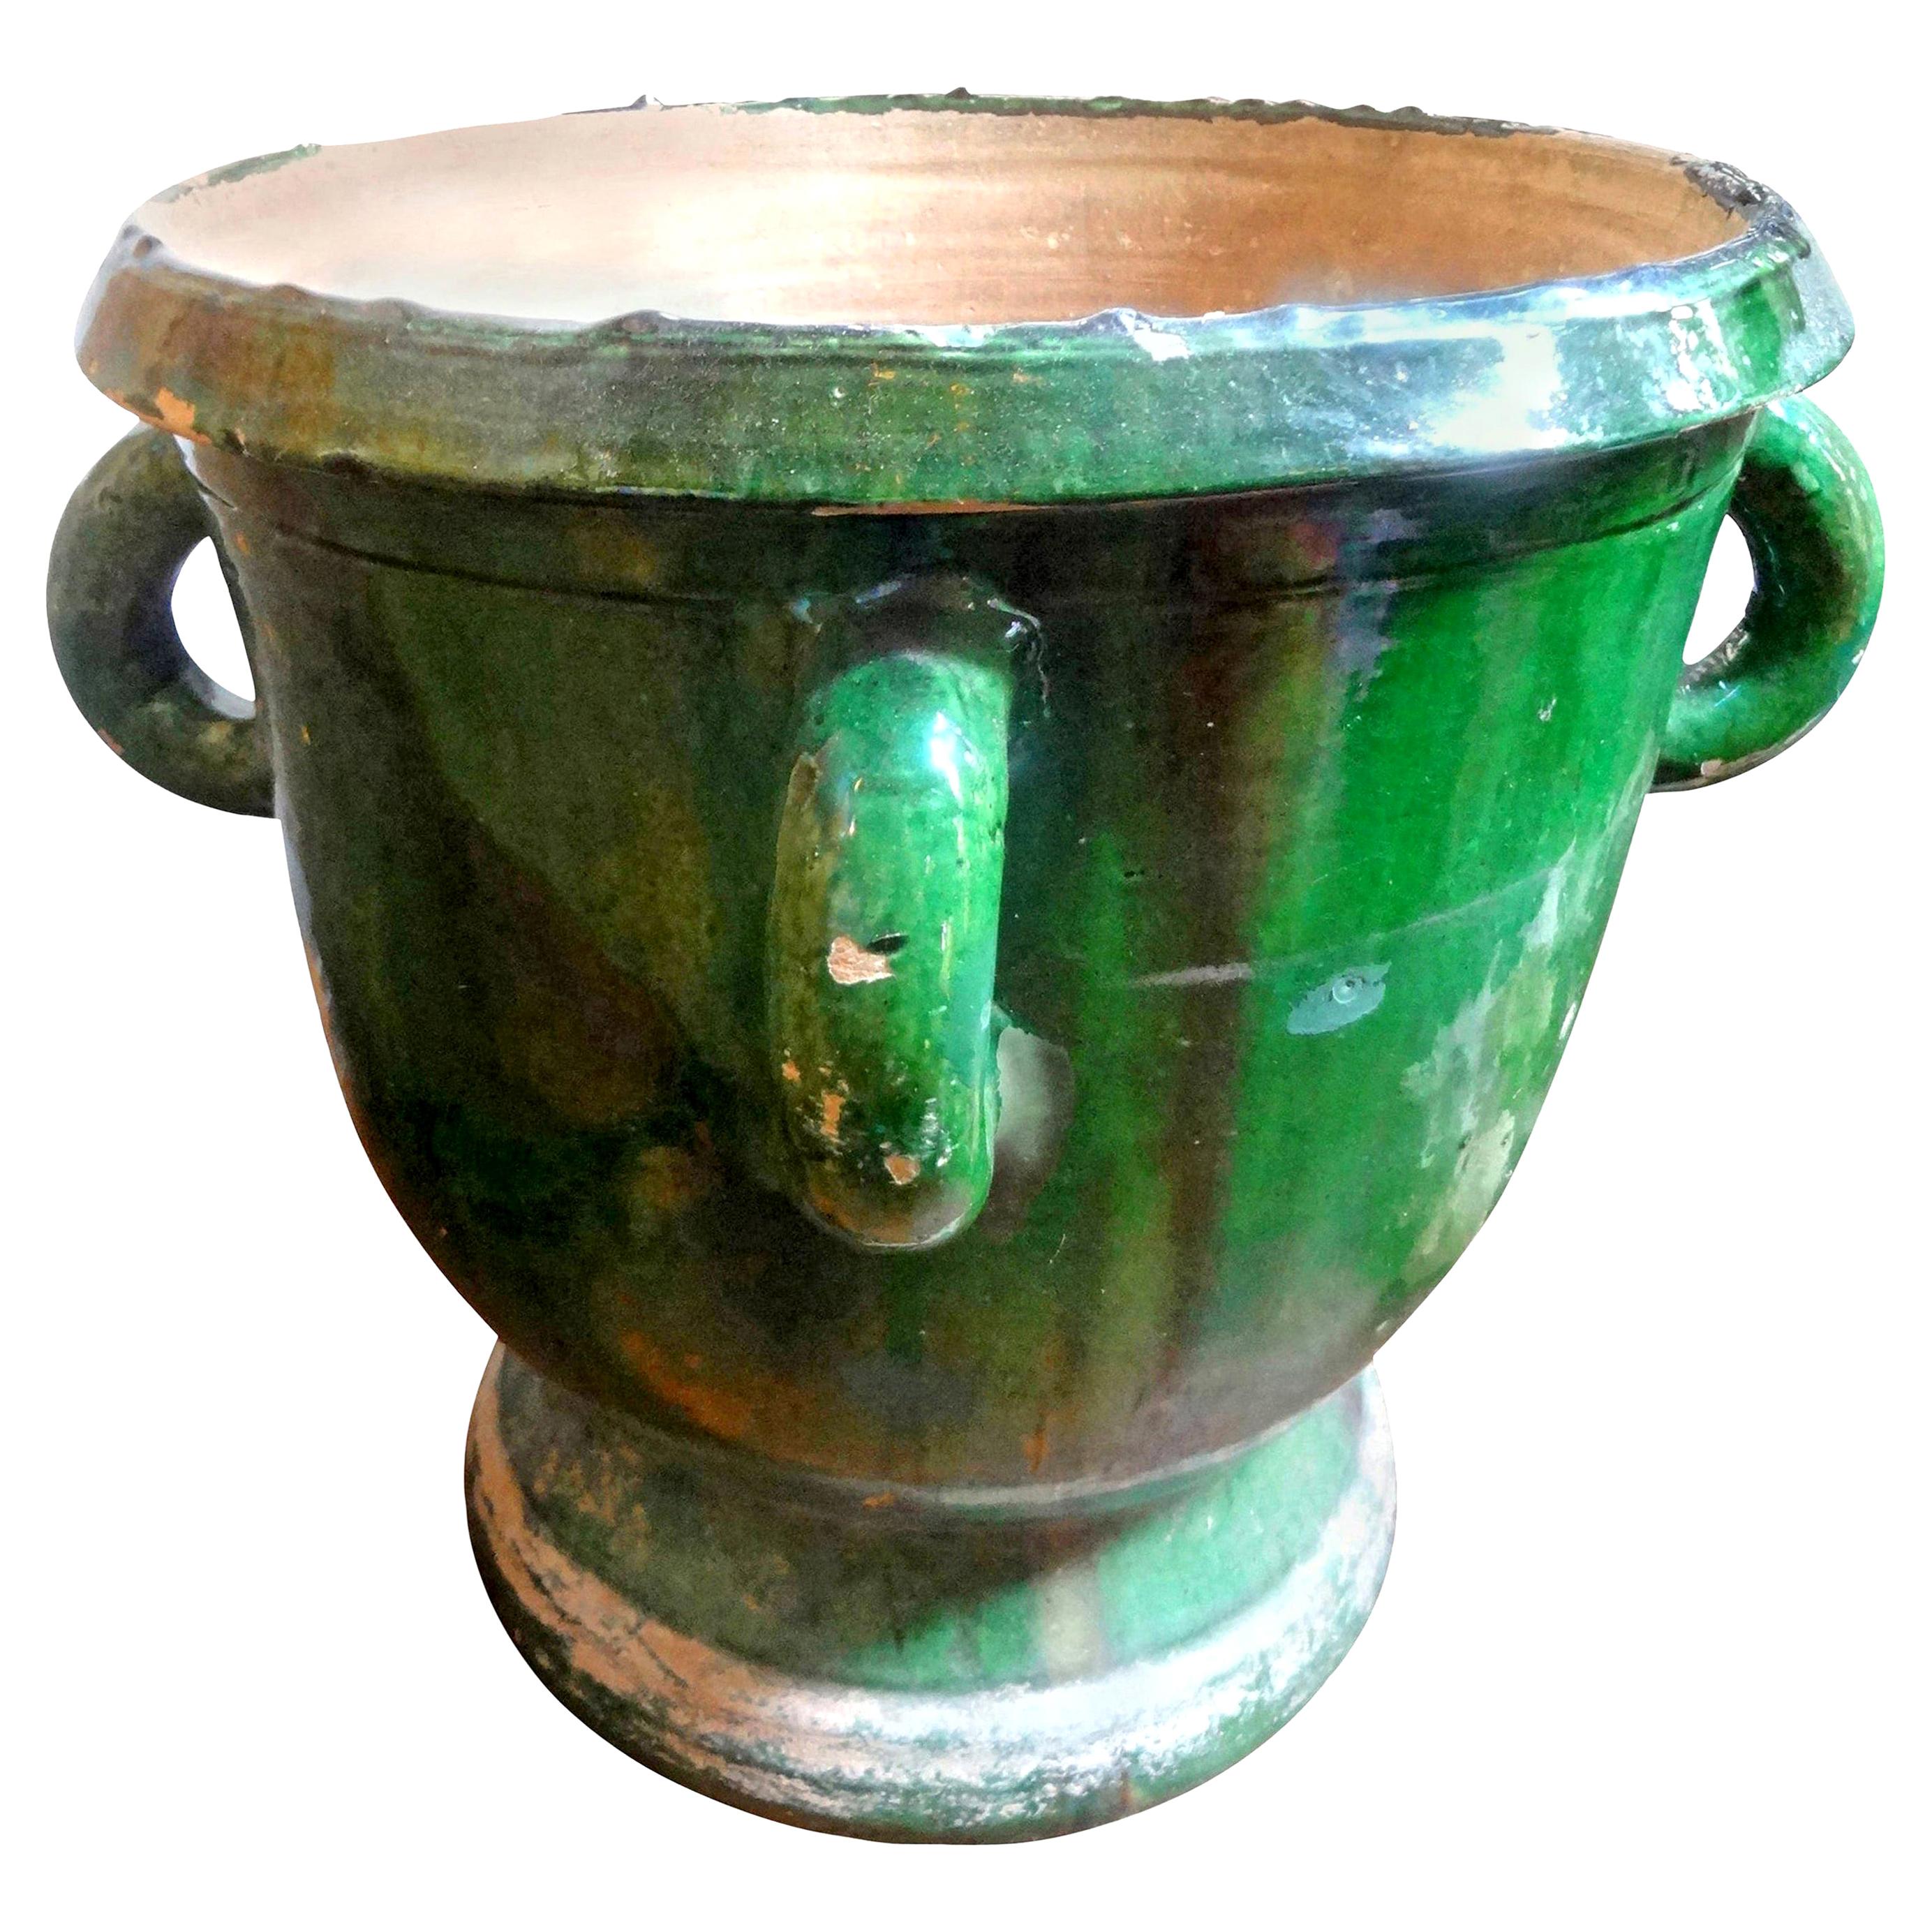 19th Century French Green Glazed Terracotta Planter from Anduze